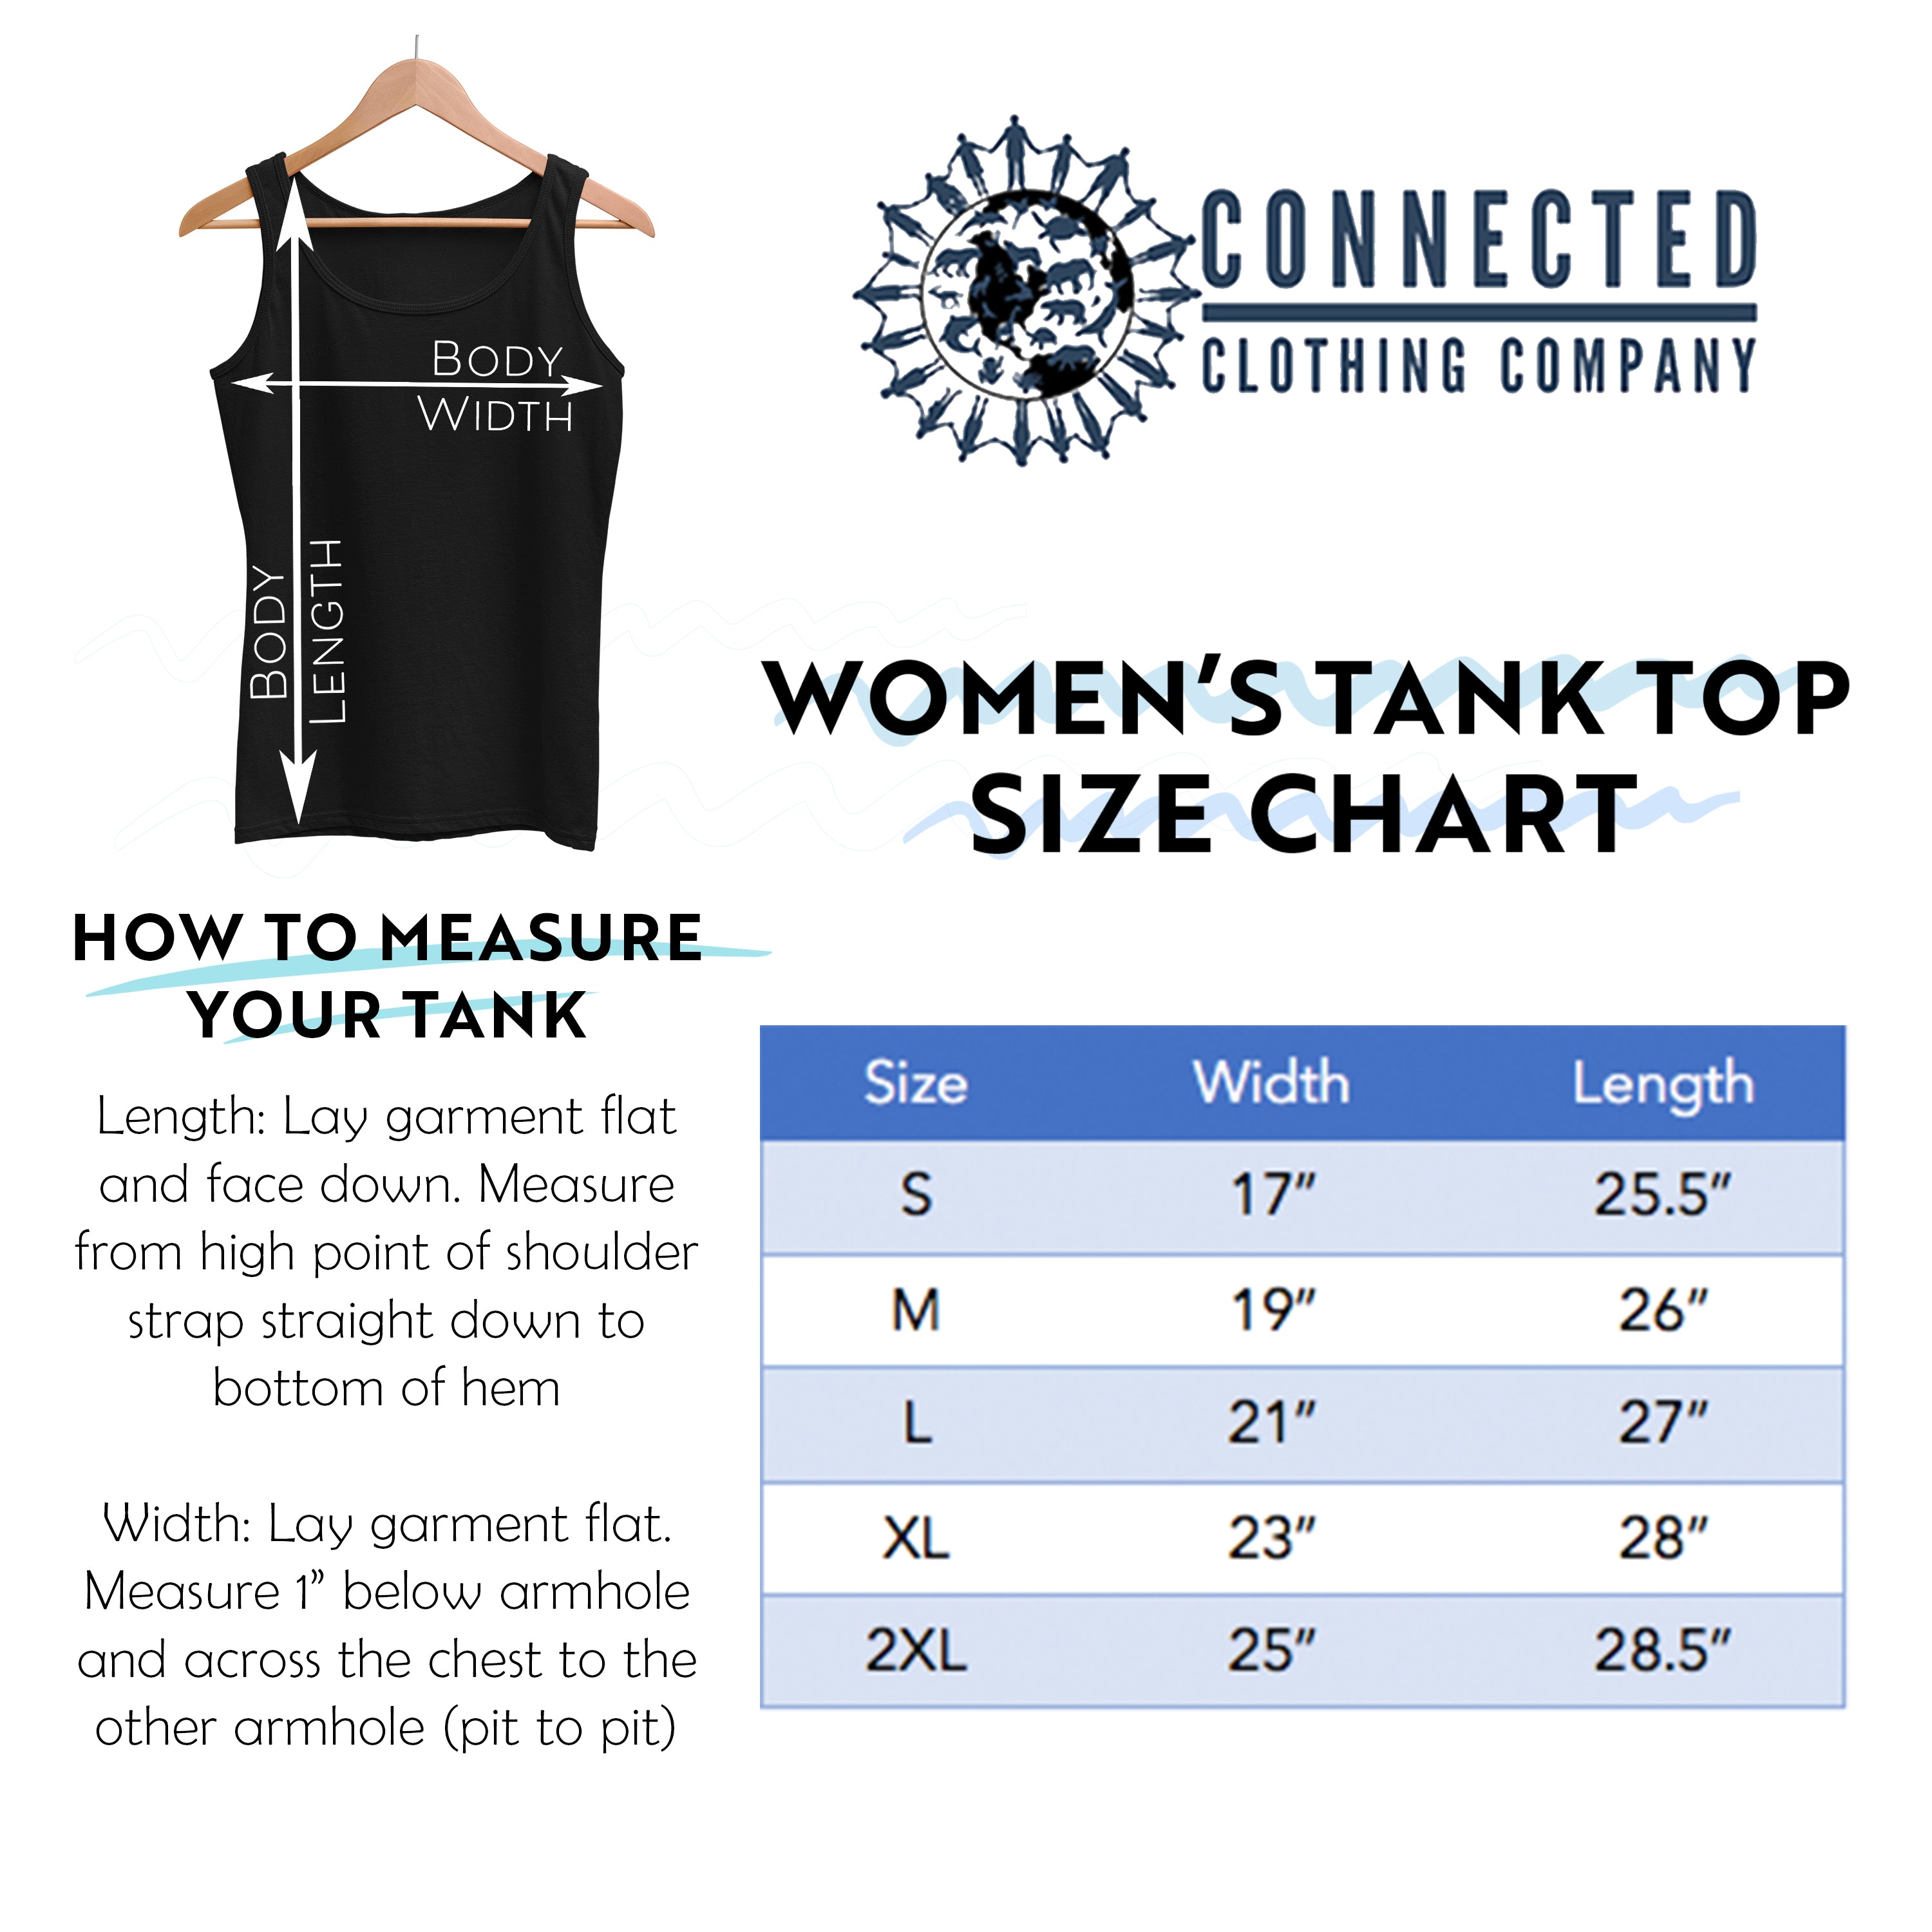 Women's Relaxed Tank Top Size Chart - architectconstructor - Ethically and Sustainably Made - 10% donated to Mission Blue ocean conservation